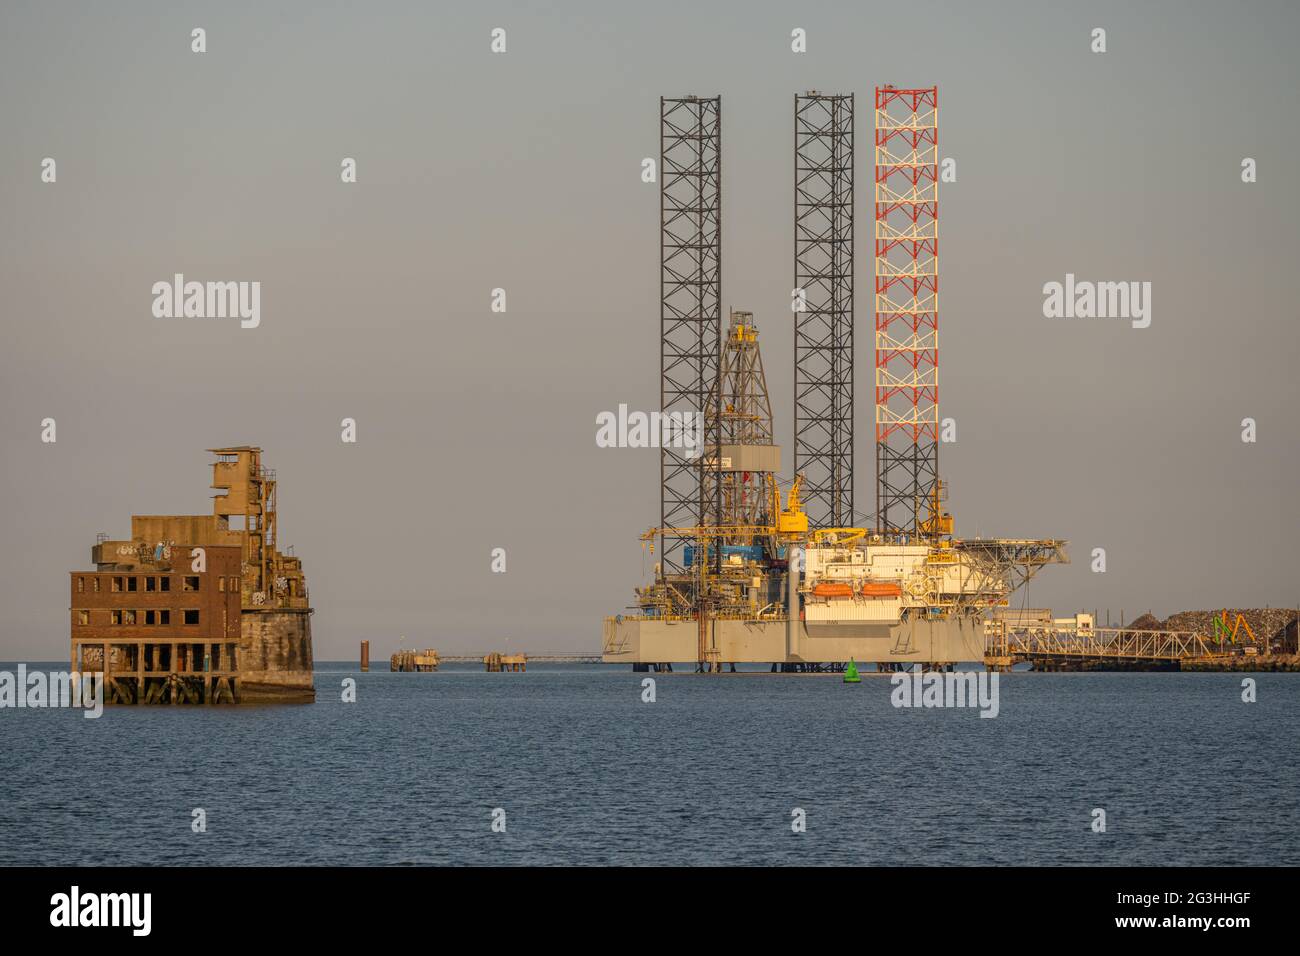 The grain fort looking towards the port of Sheerness, with oil platform moored in the Swale Stock Photo